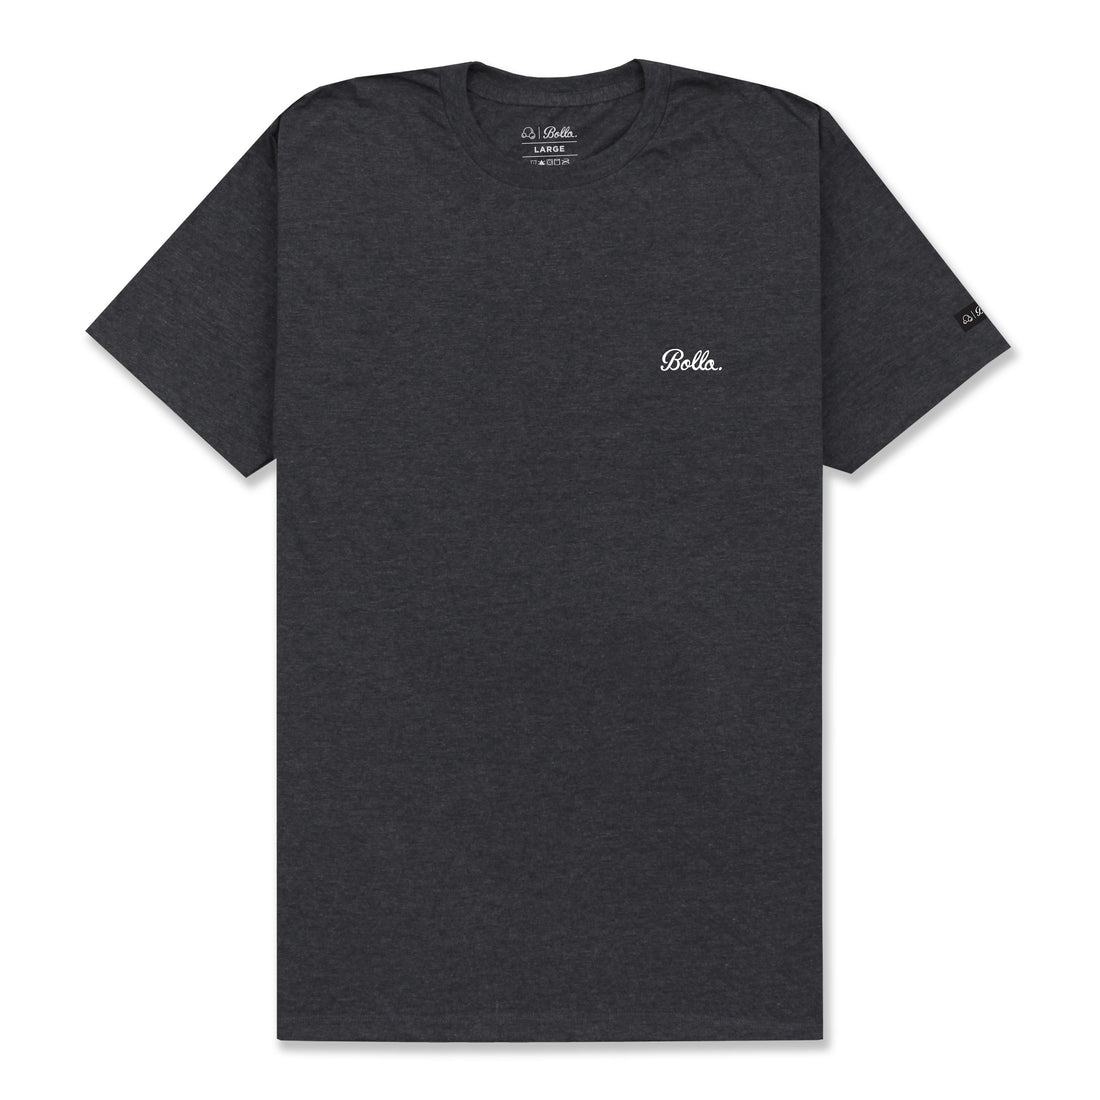 DAILY HEATHER T-SHIRT - CHARCOAL